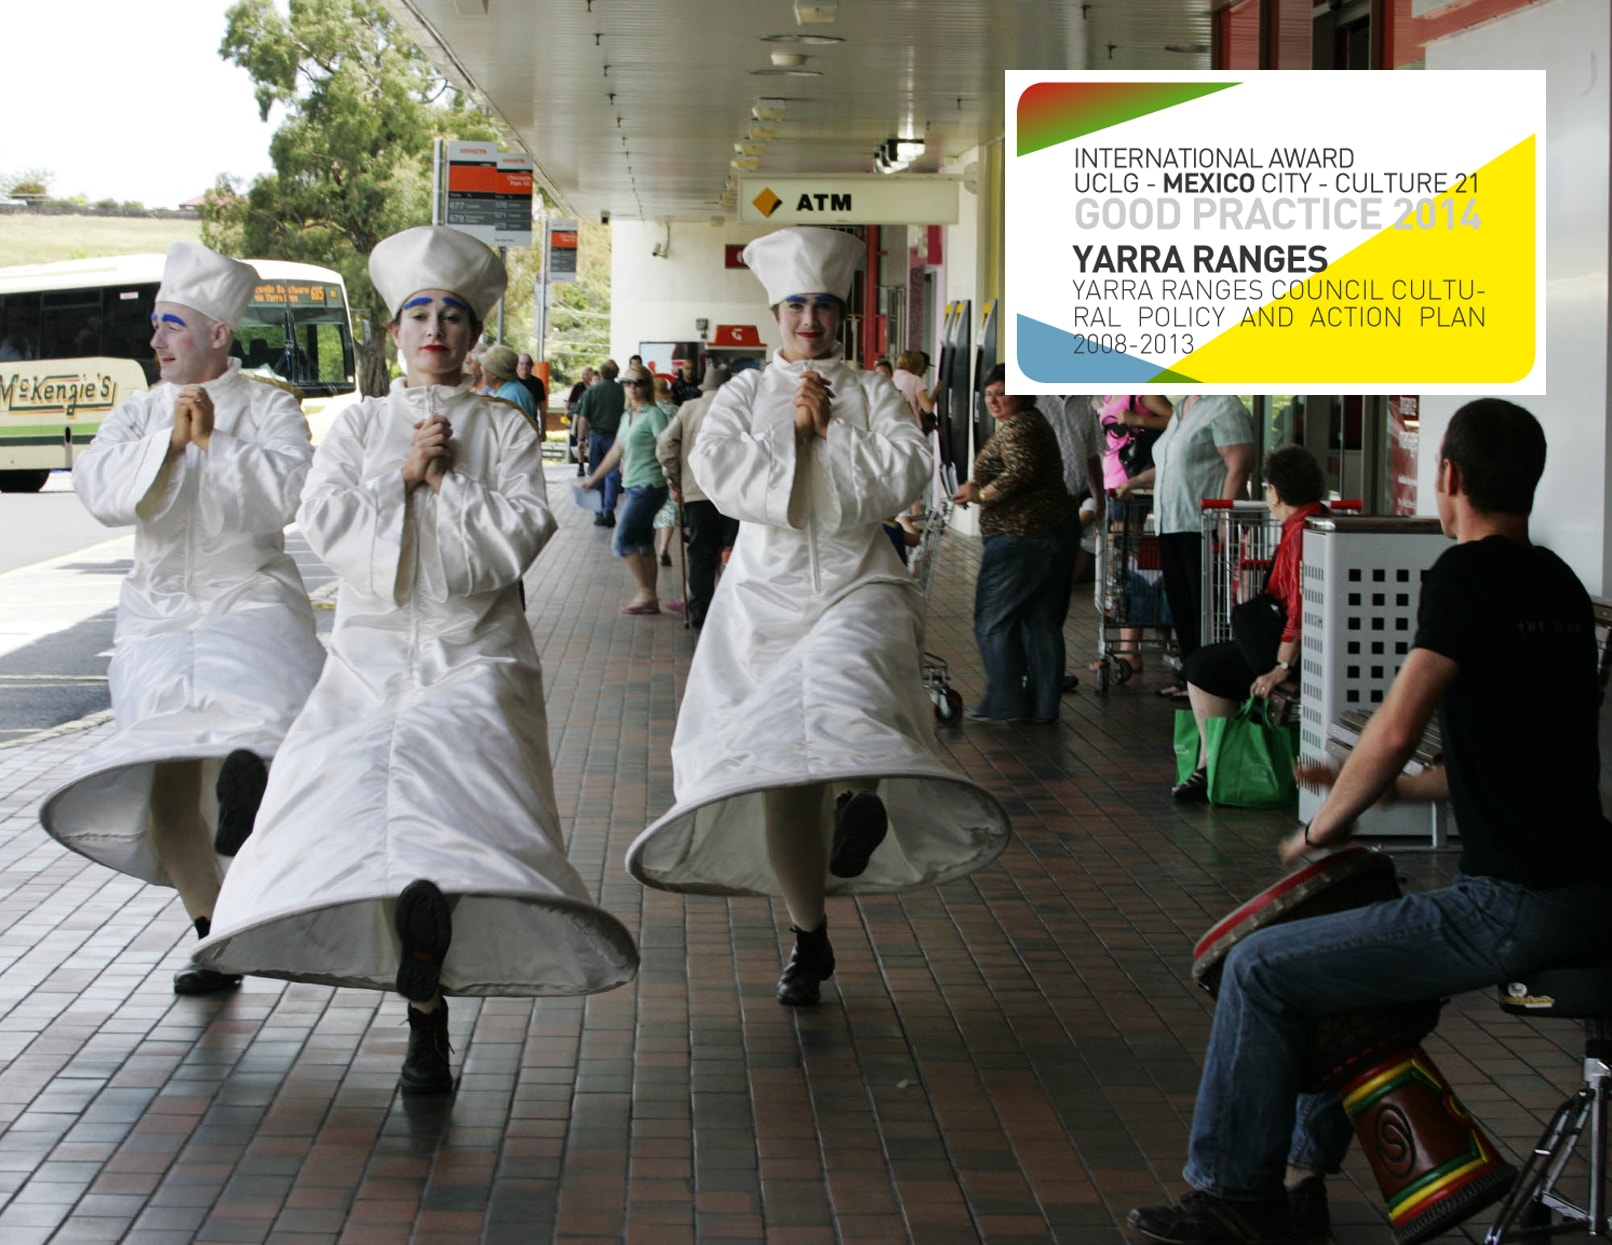 Yarra Ranges council cultural policy and action plan 2008-2013